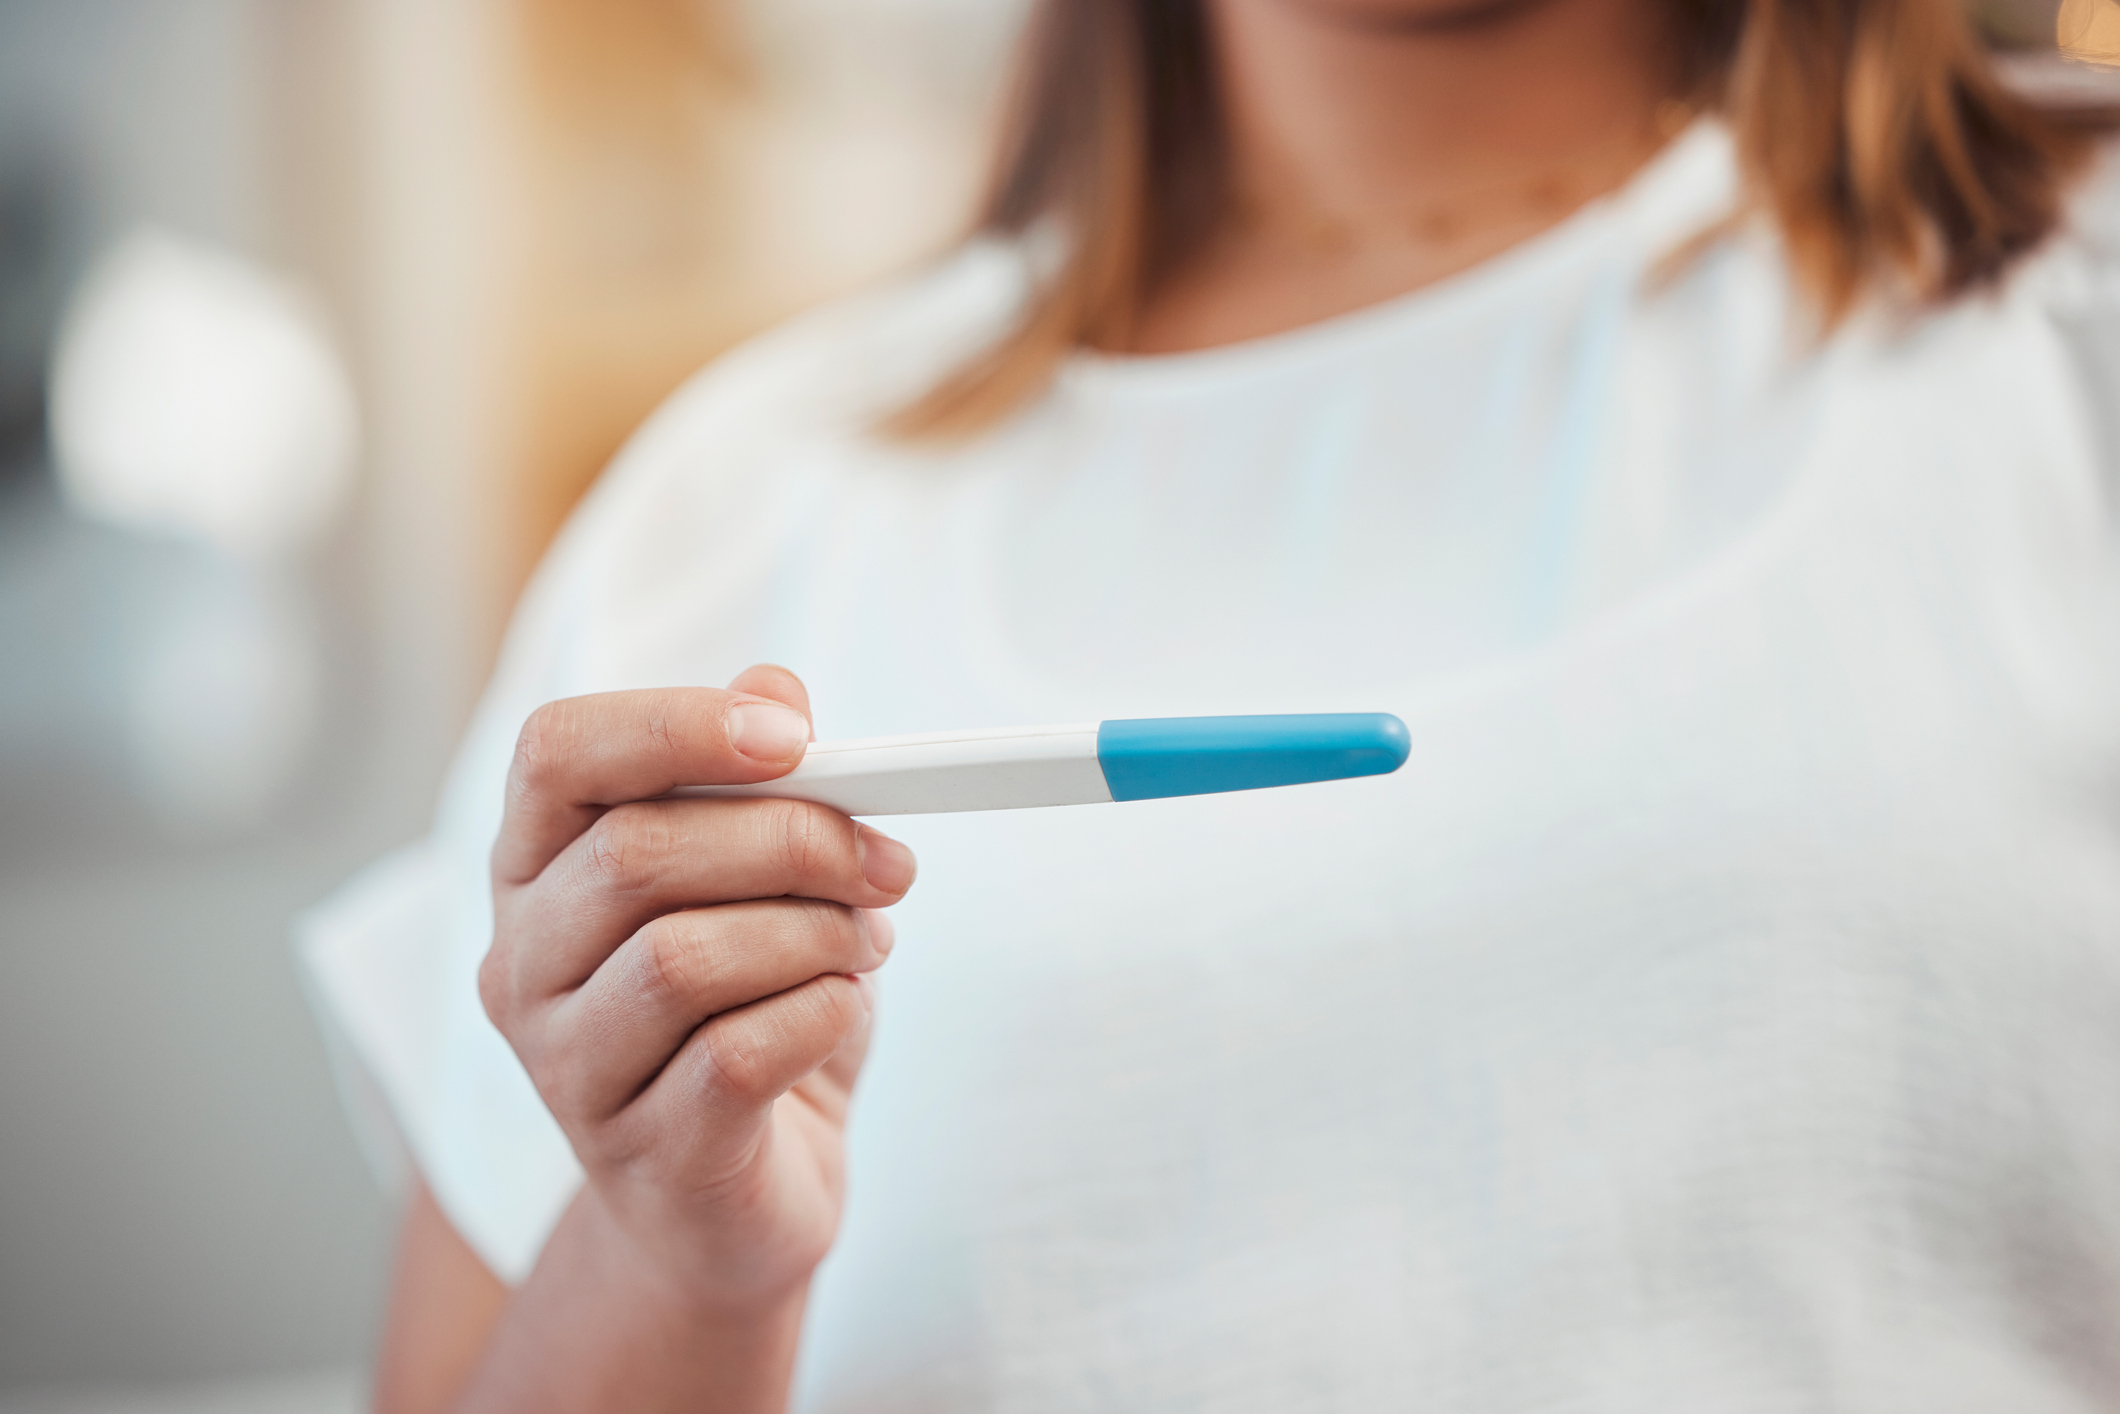 Image of a white woman with blonde hair holding a white and blue pregnancy test.